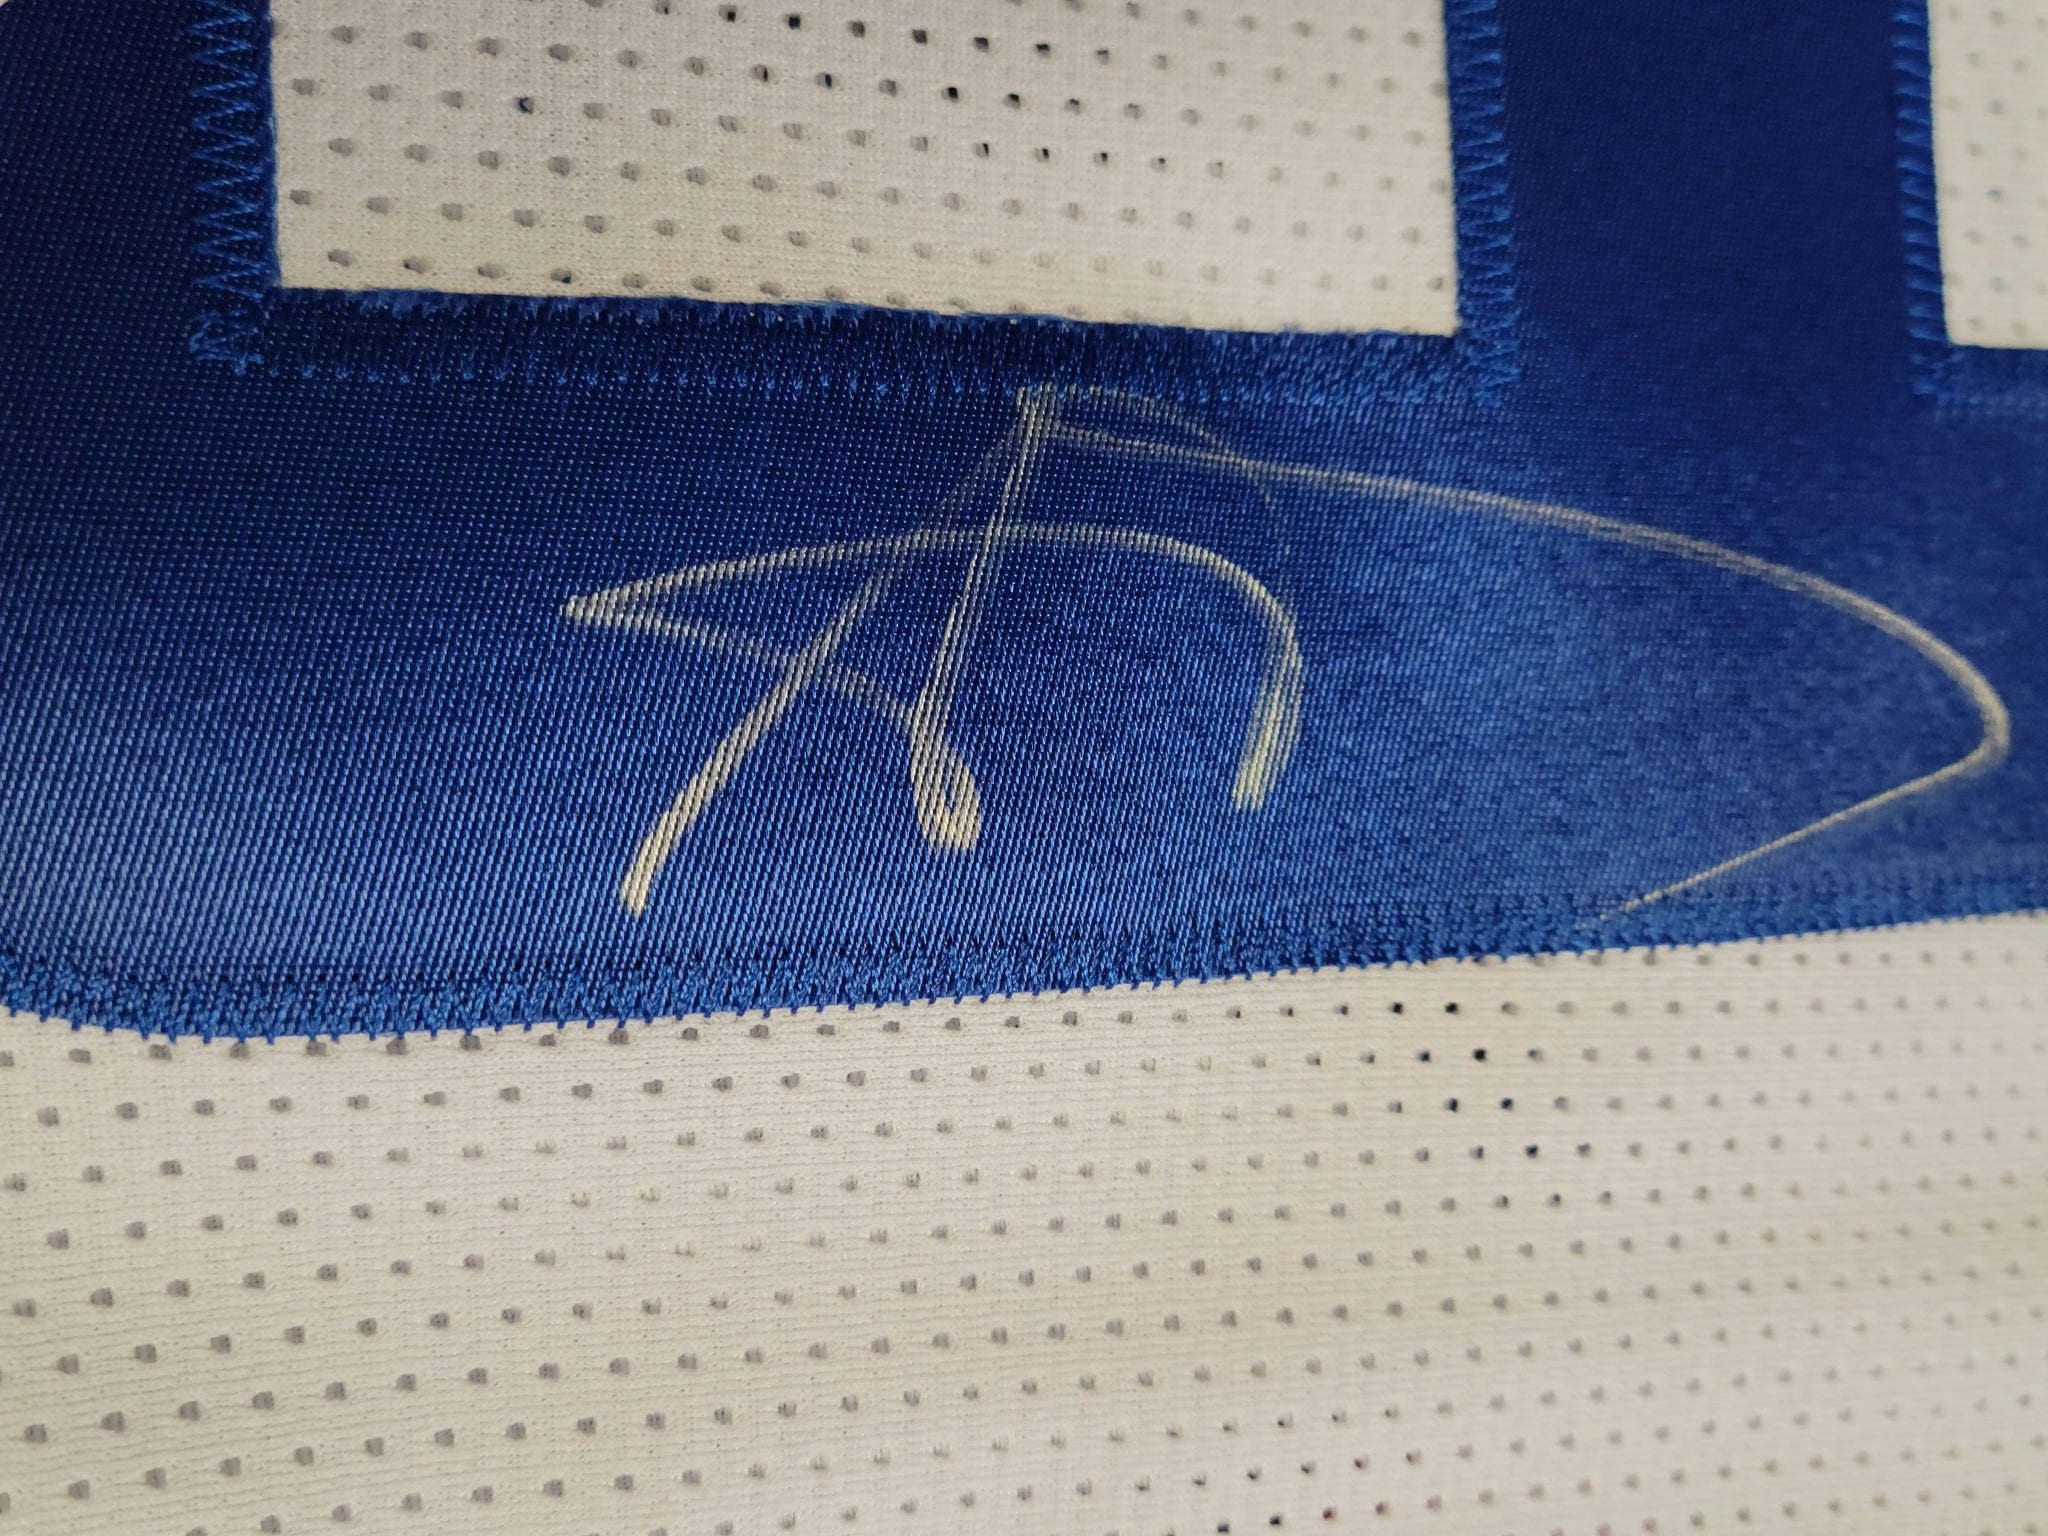  AARON DONALD Signed/Autographed Rams Authentic Style